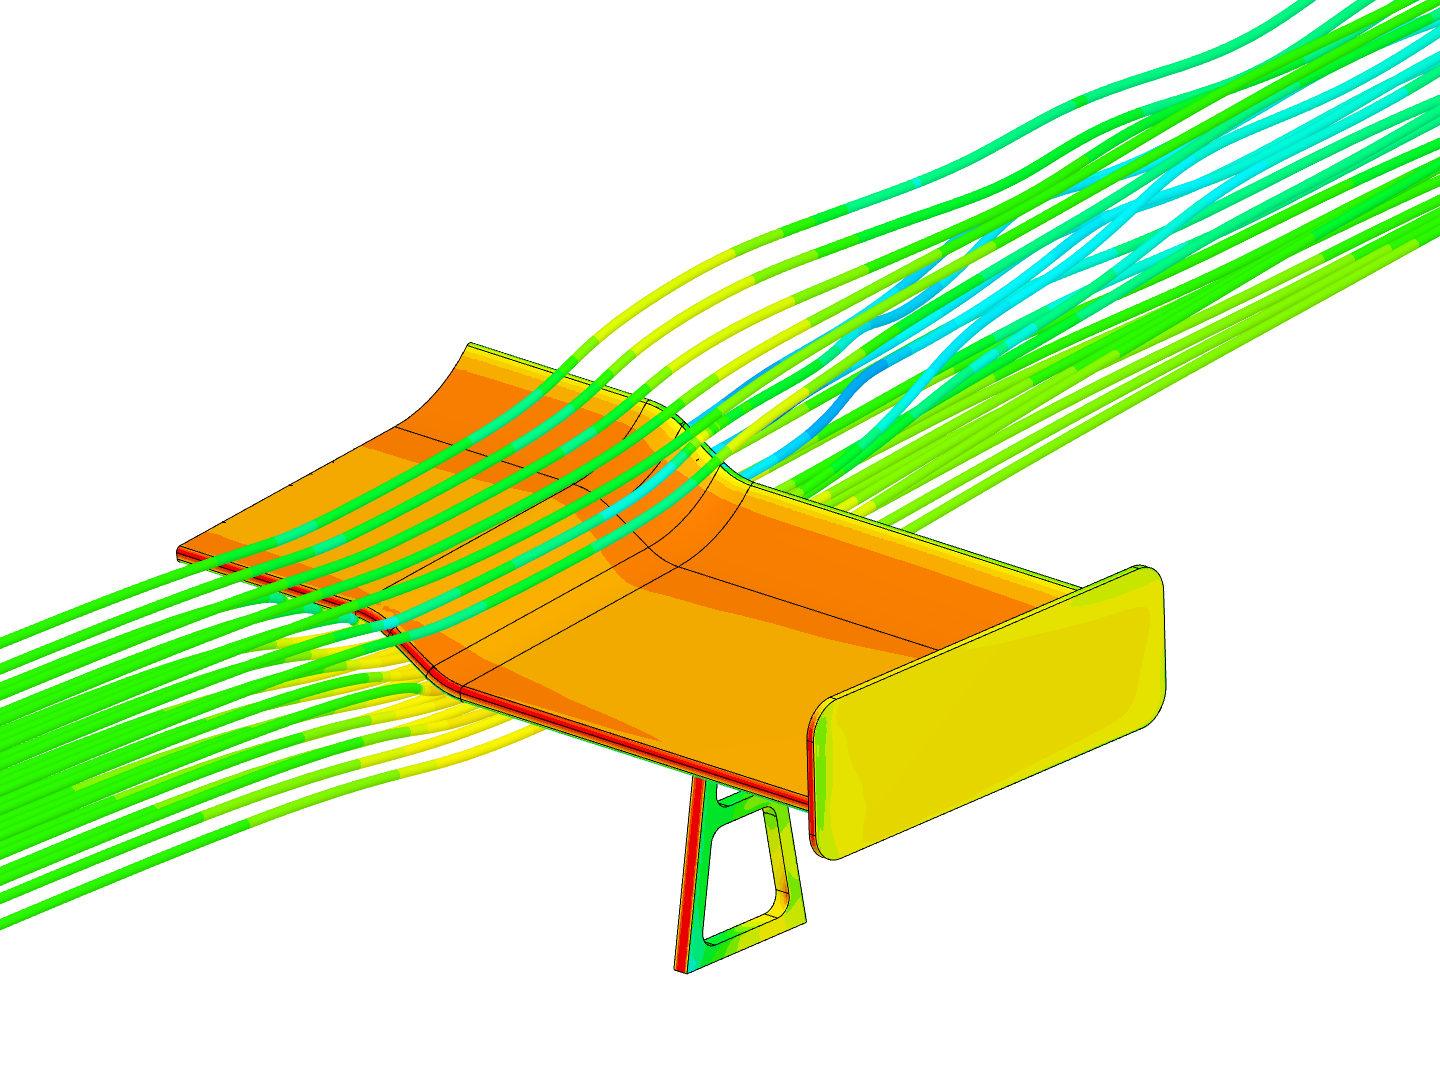 Student - Airflow Around a GT Car Spoiler image